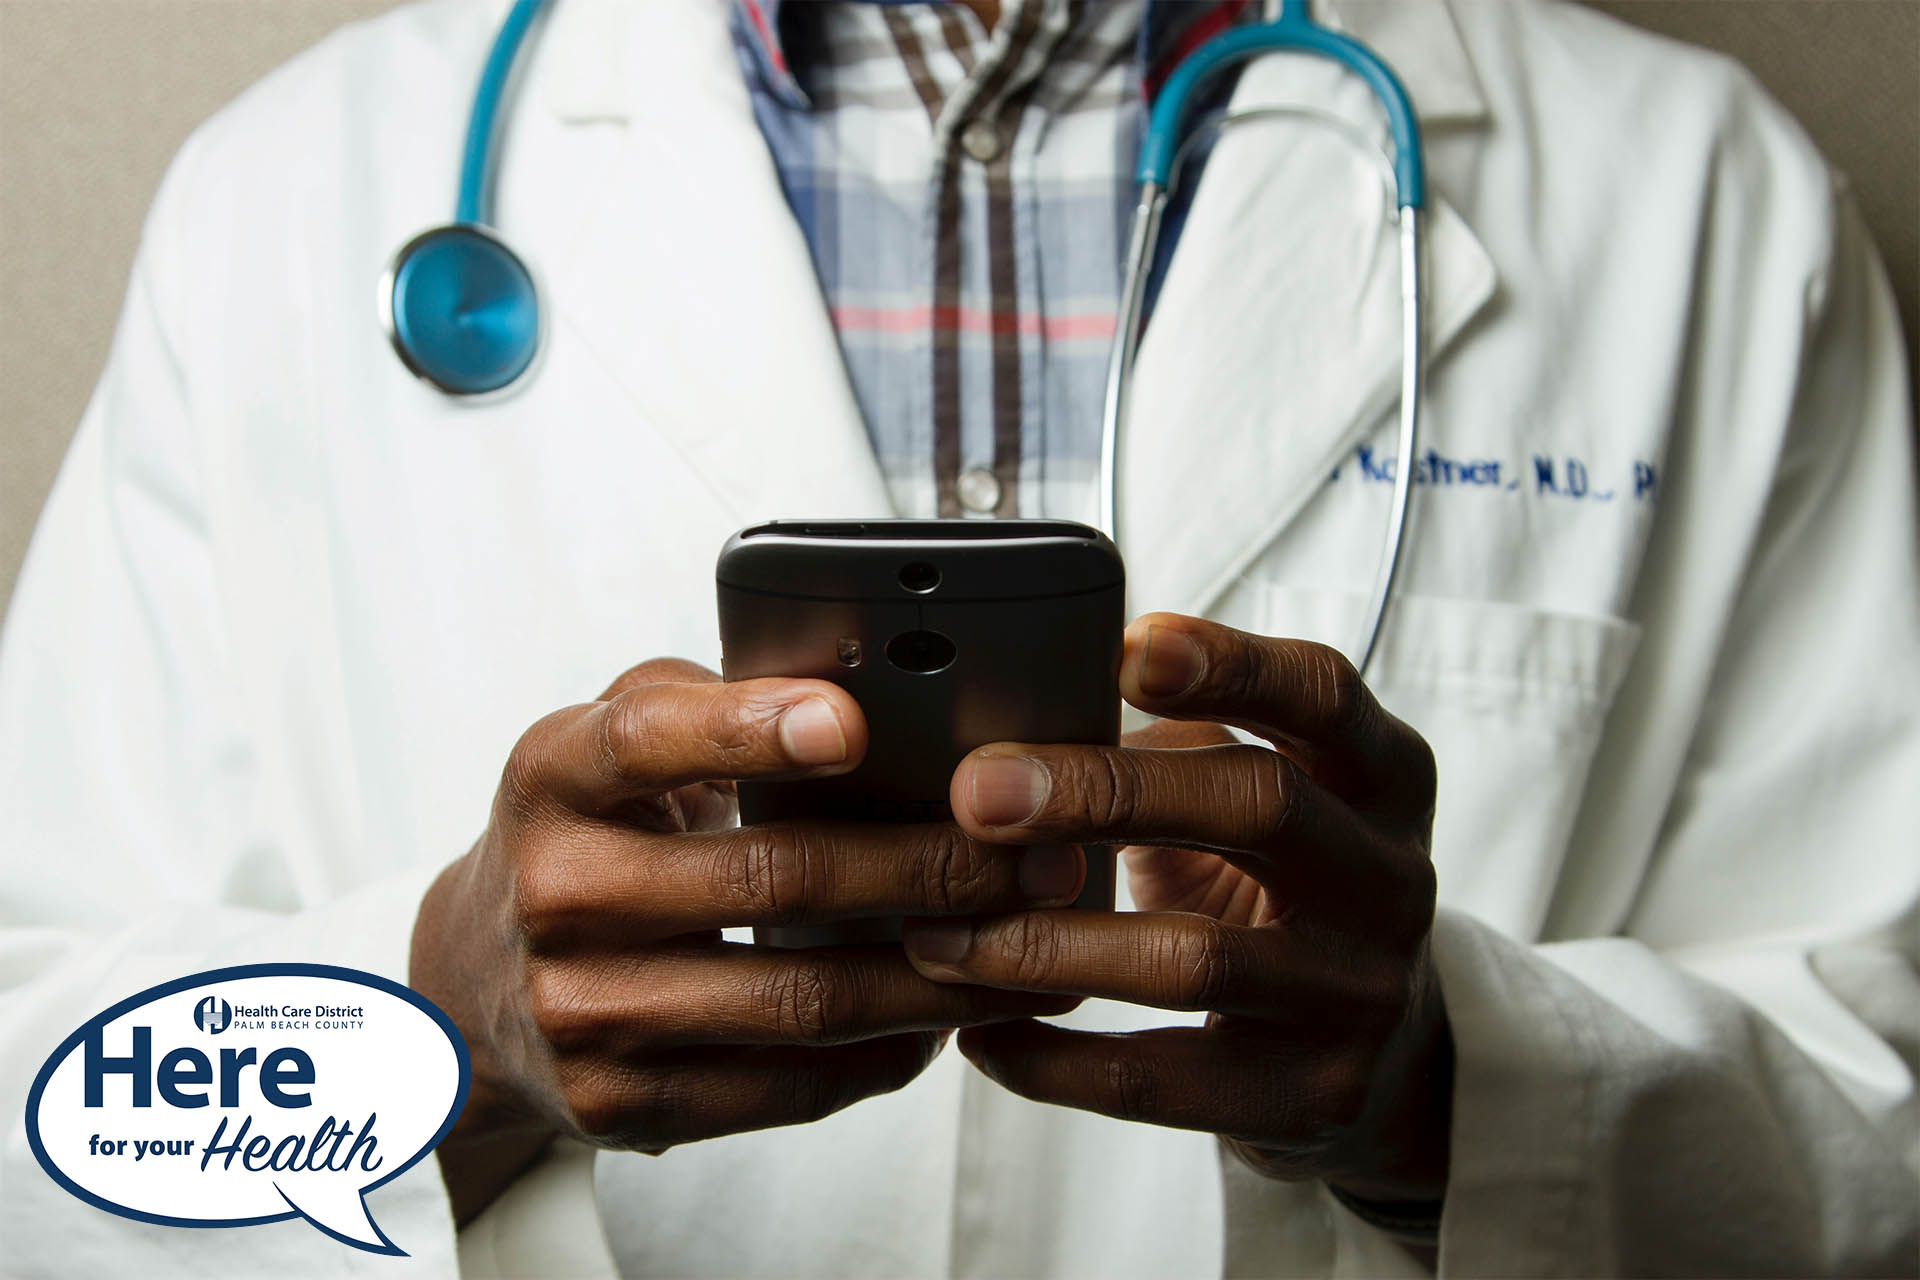 A doctor types on his cell phone